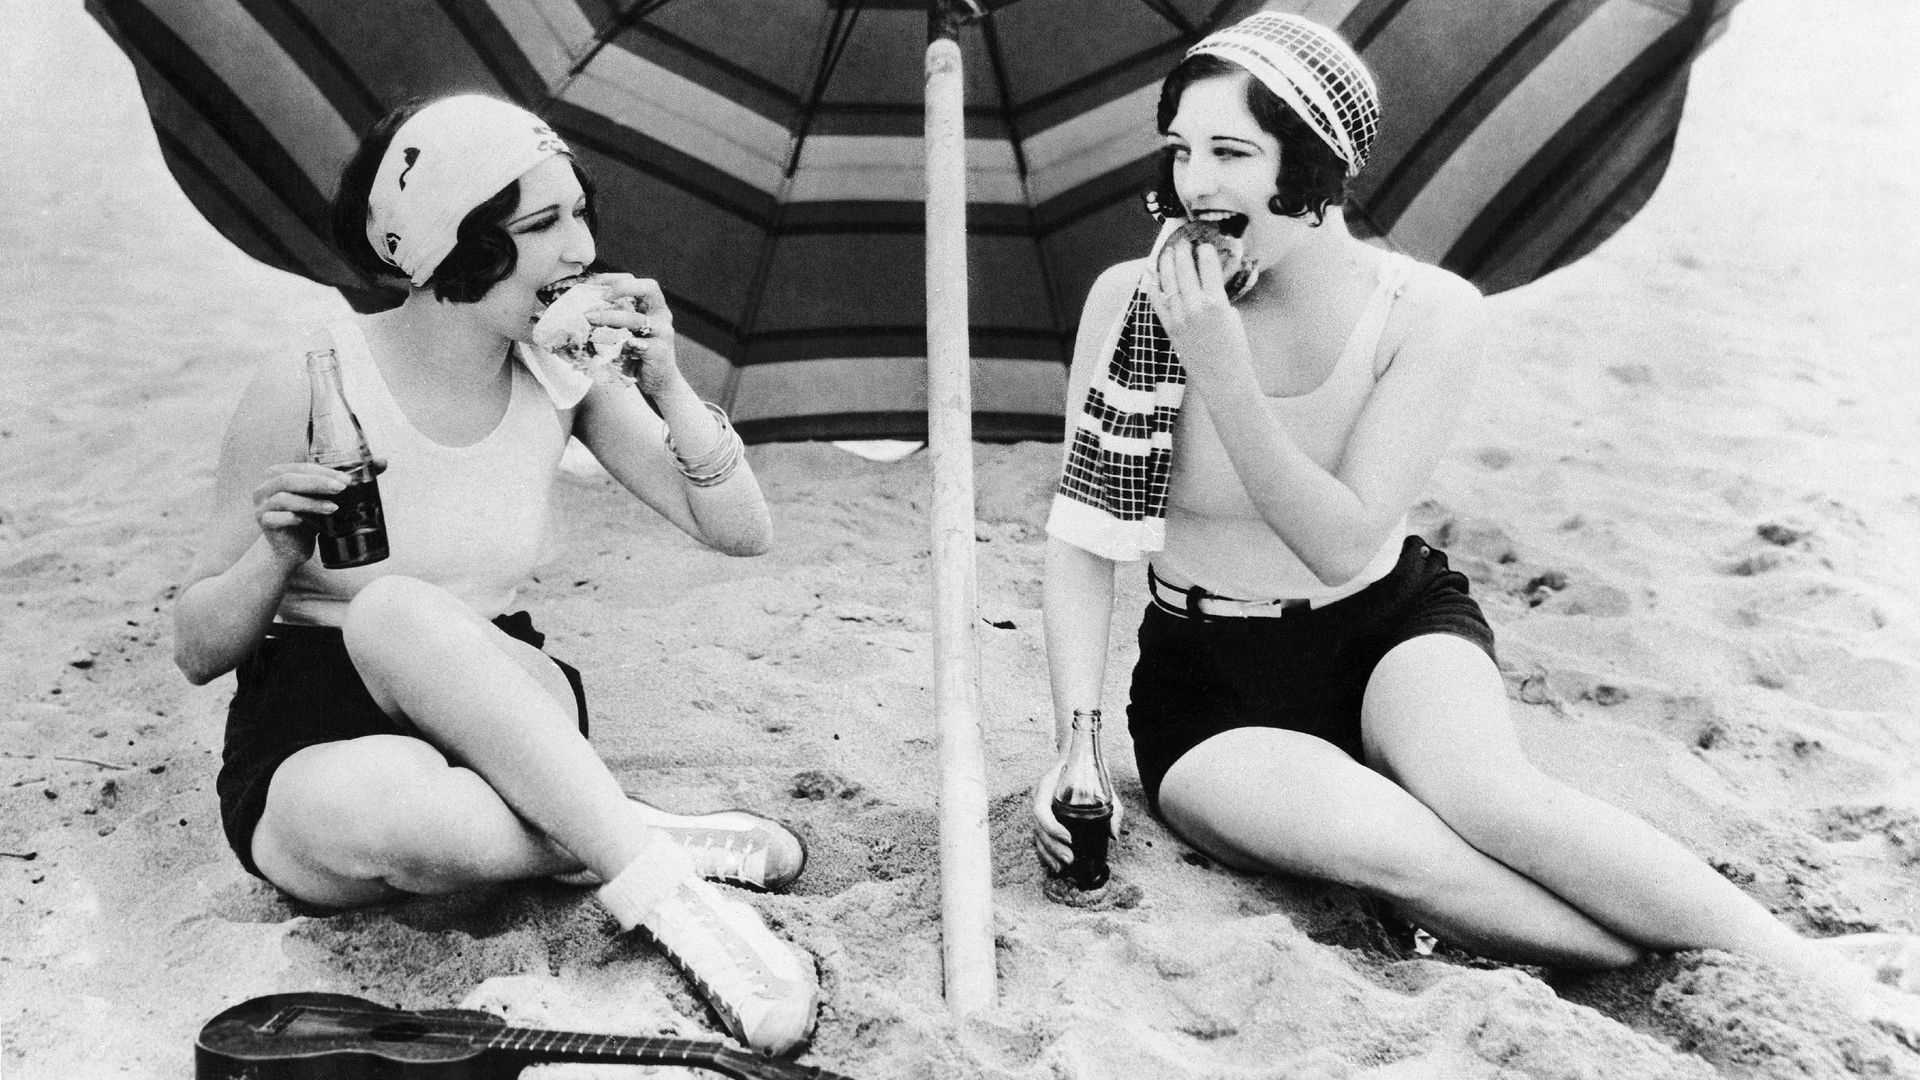 In 1925, two actresses eating burgers on the beach